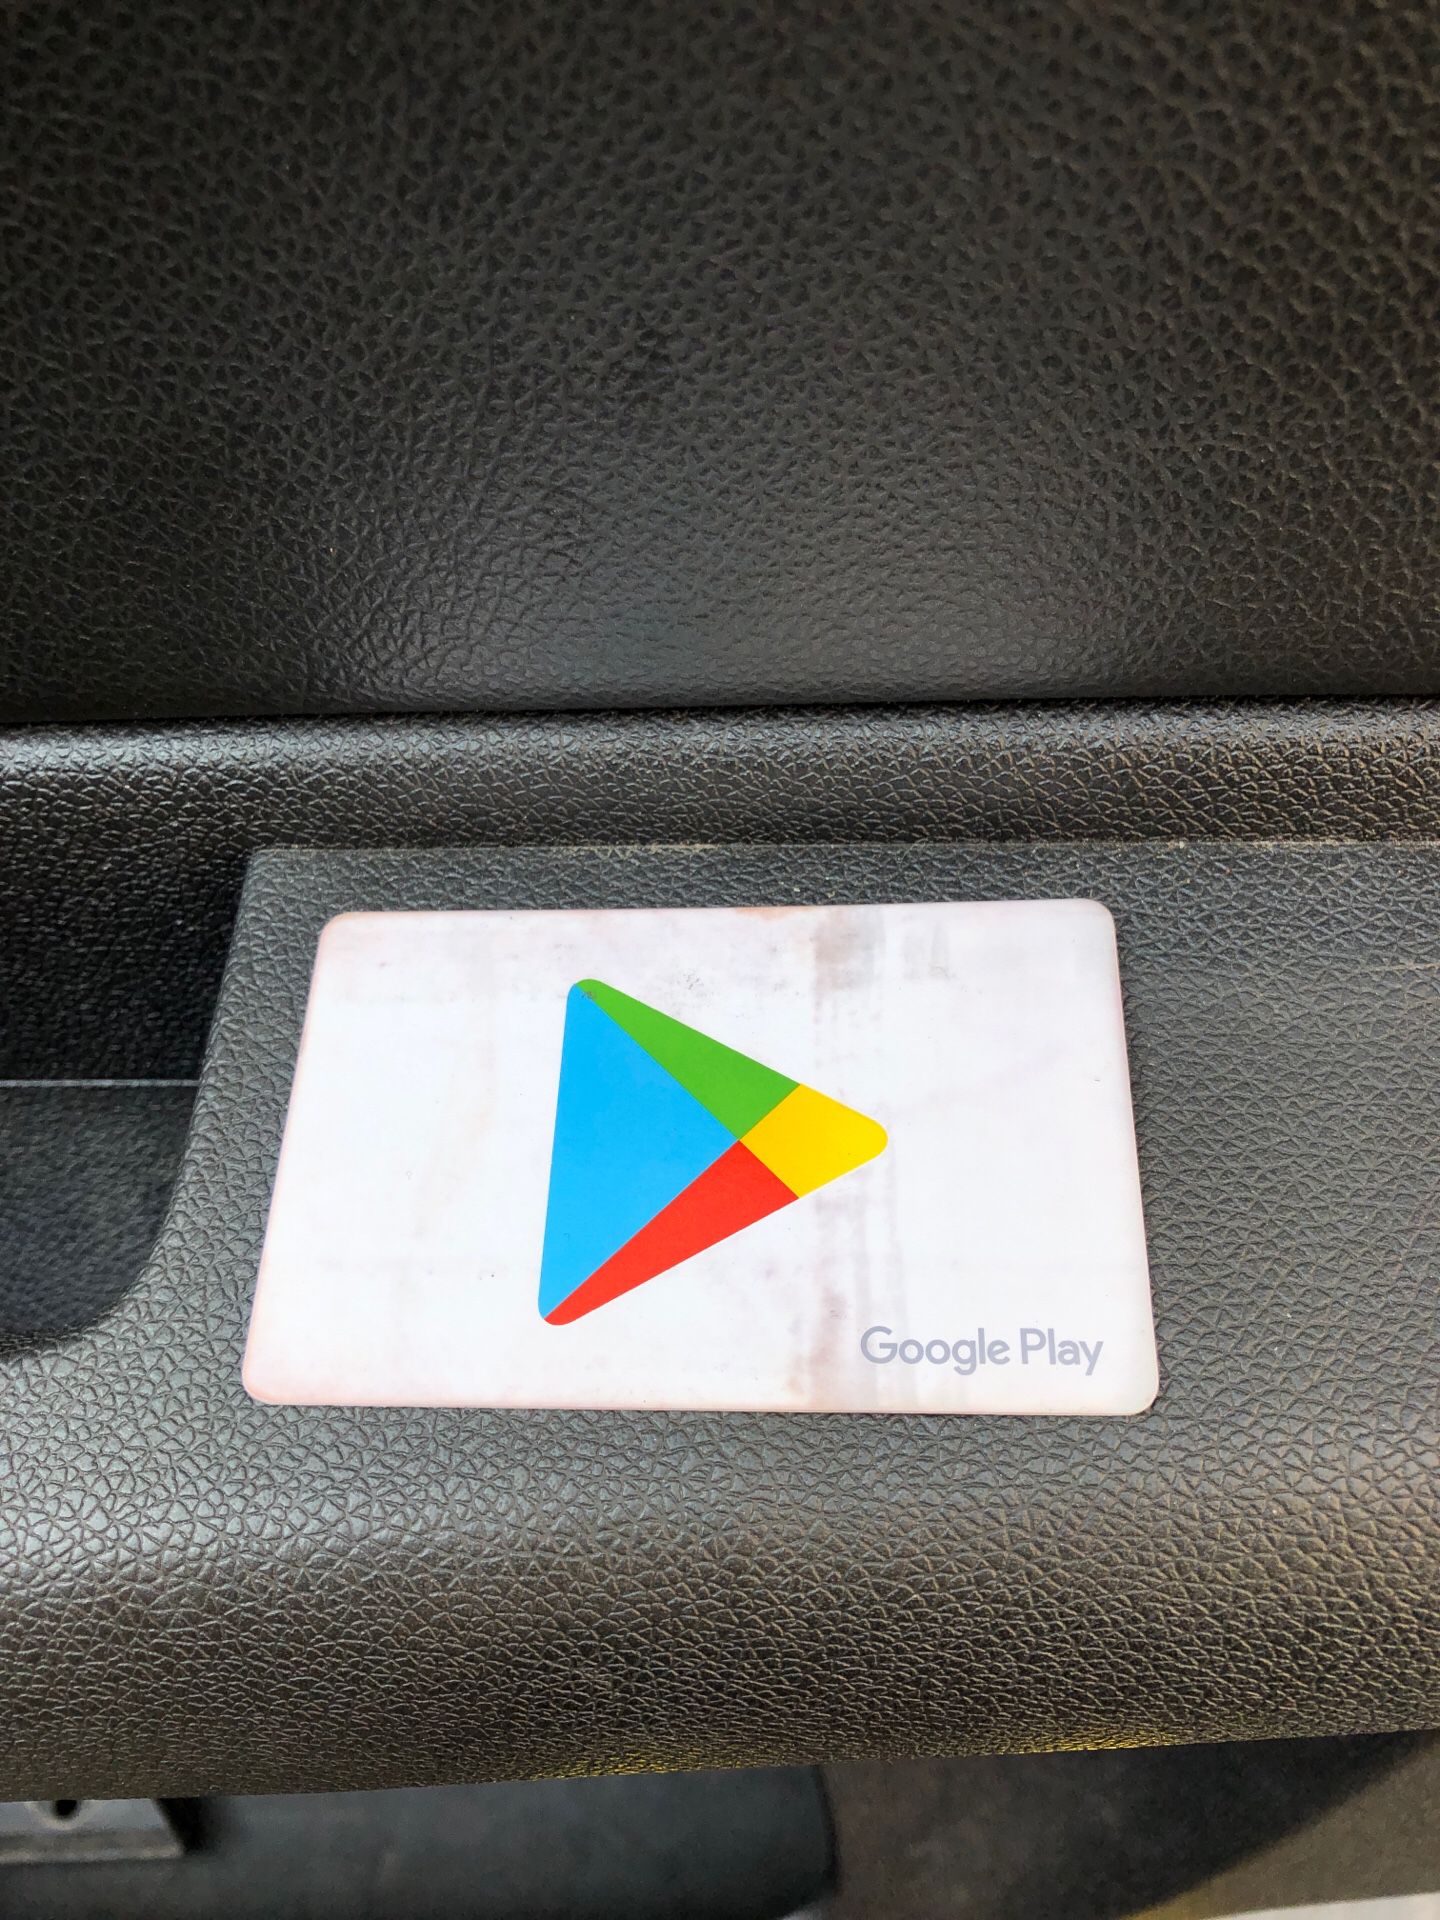 $10 Google play card not used asking $9